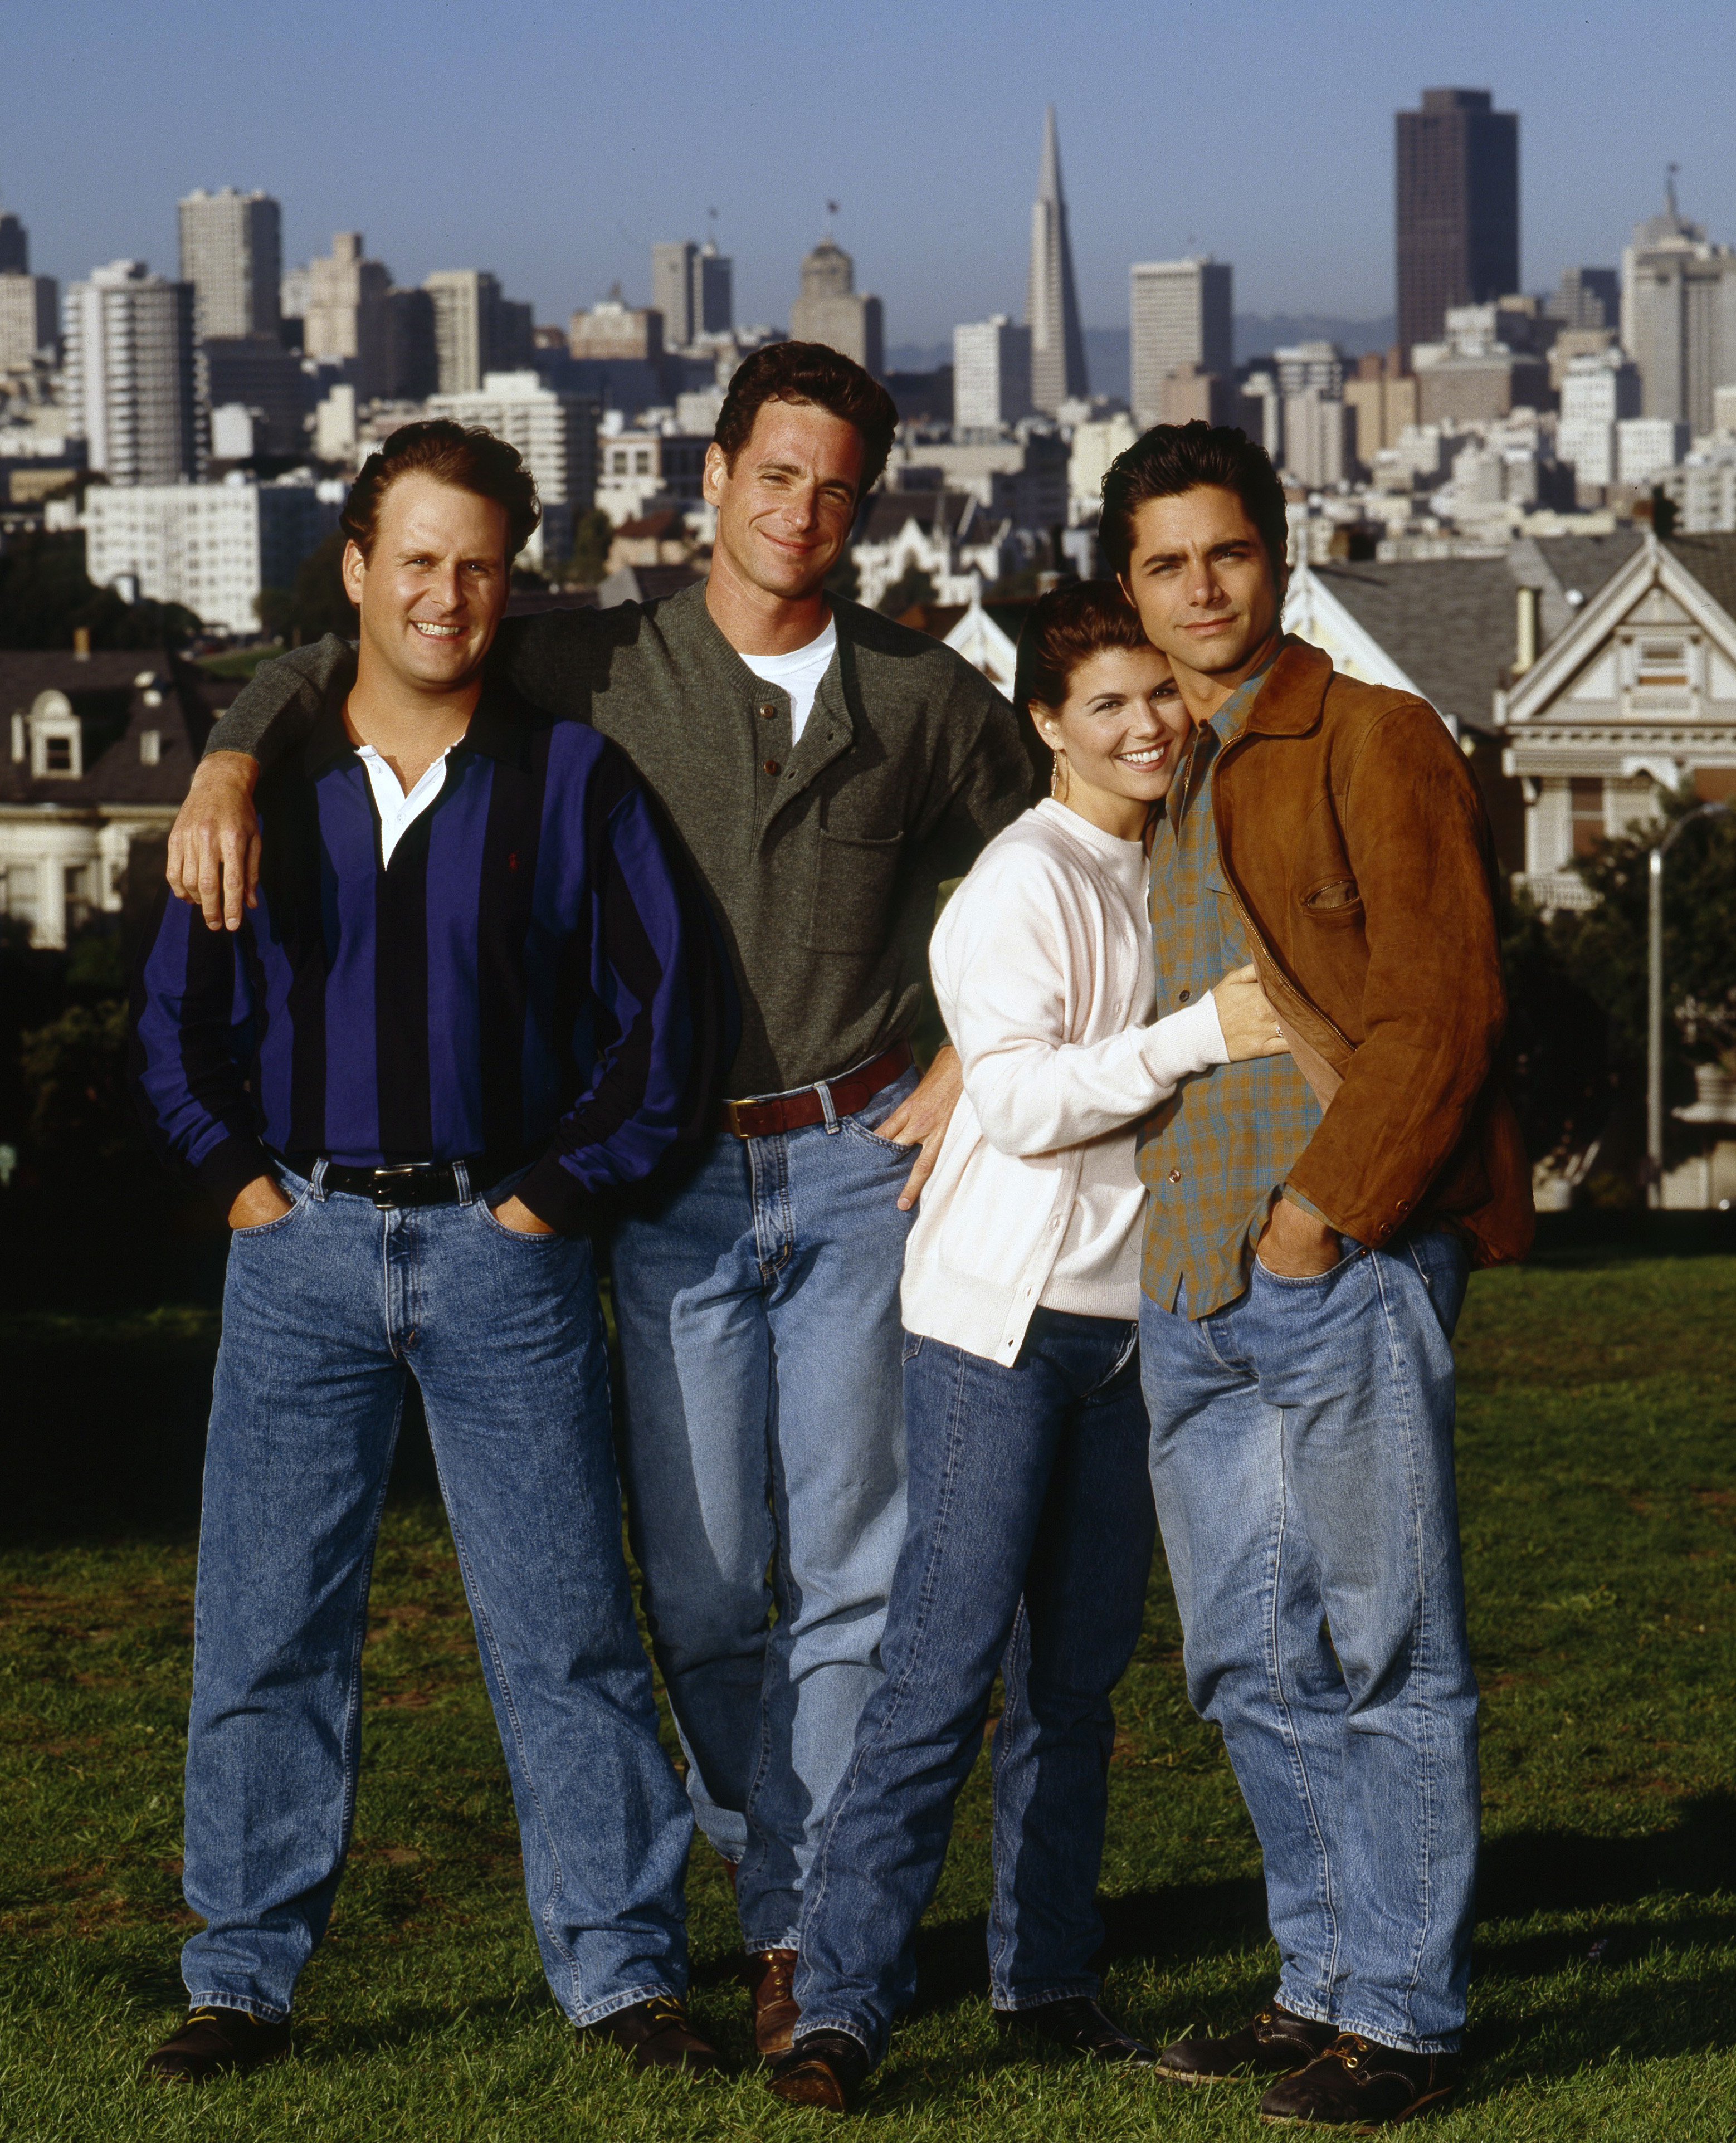 (L-R) Dave Coulier, Bob Saget, Lori Loughlin, and John Stamos pictured in a promotional photo for the ABC TV series "Full House," on August 22, 1994 | Source: Getty Images